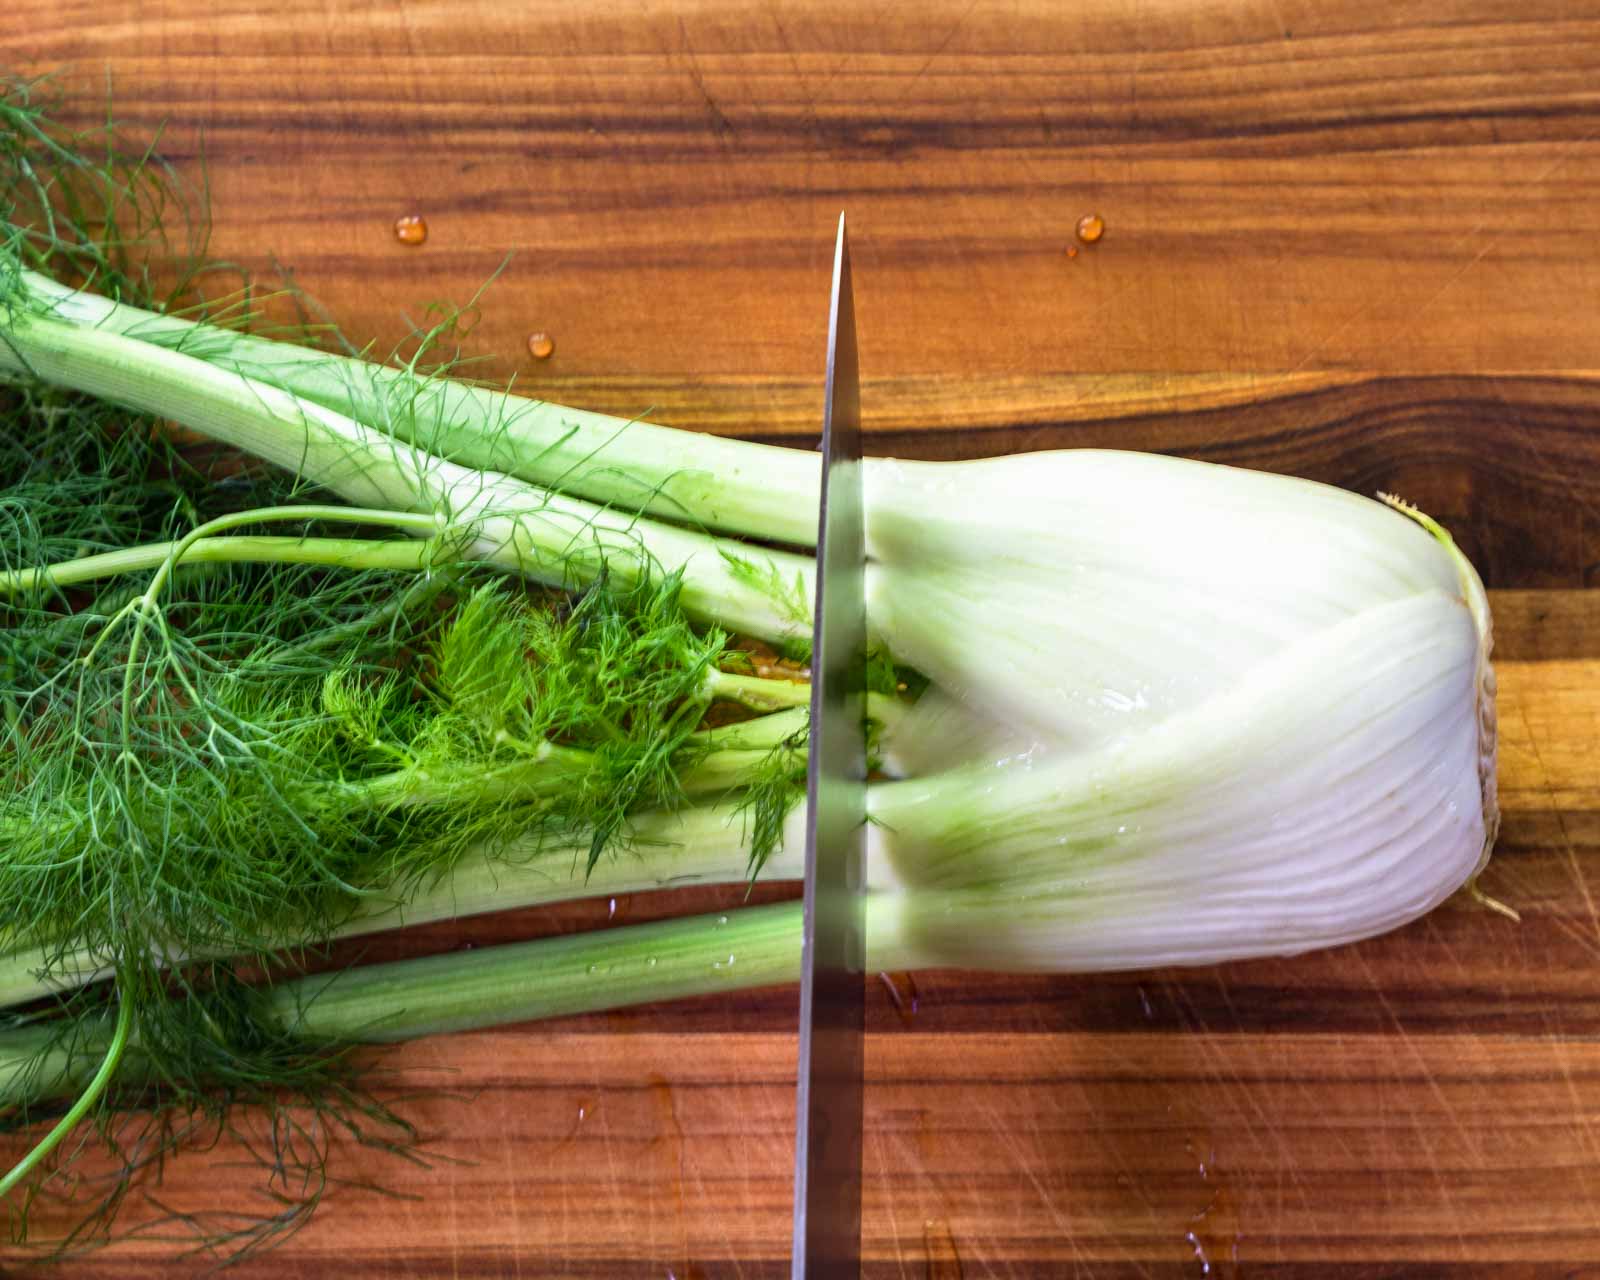 A fennel bulb showing how to cut the top off.